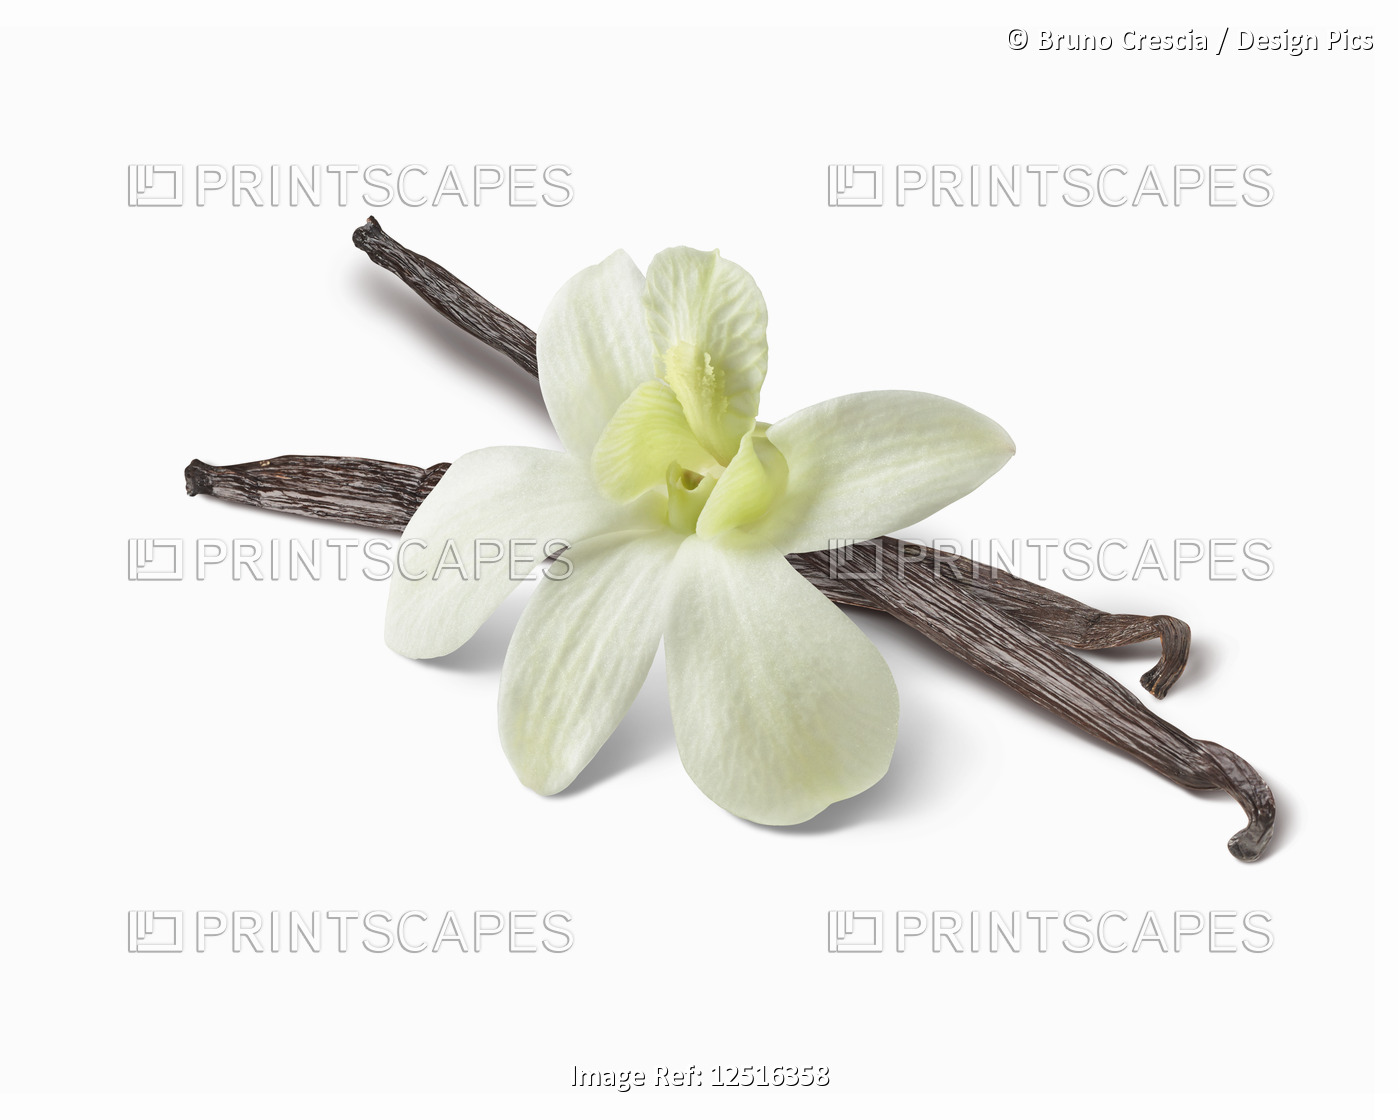 Vanilla flower and beans on a white background